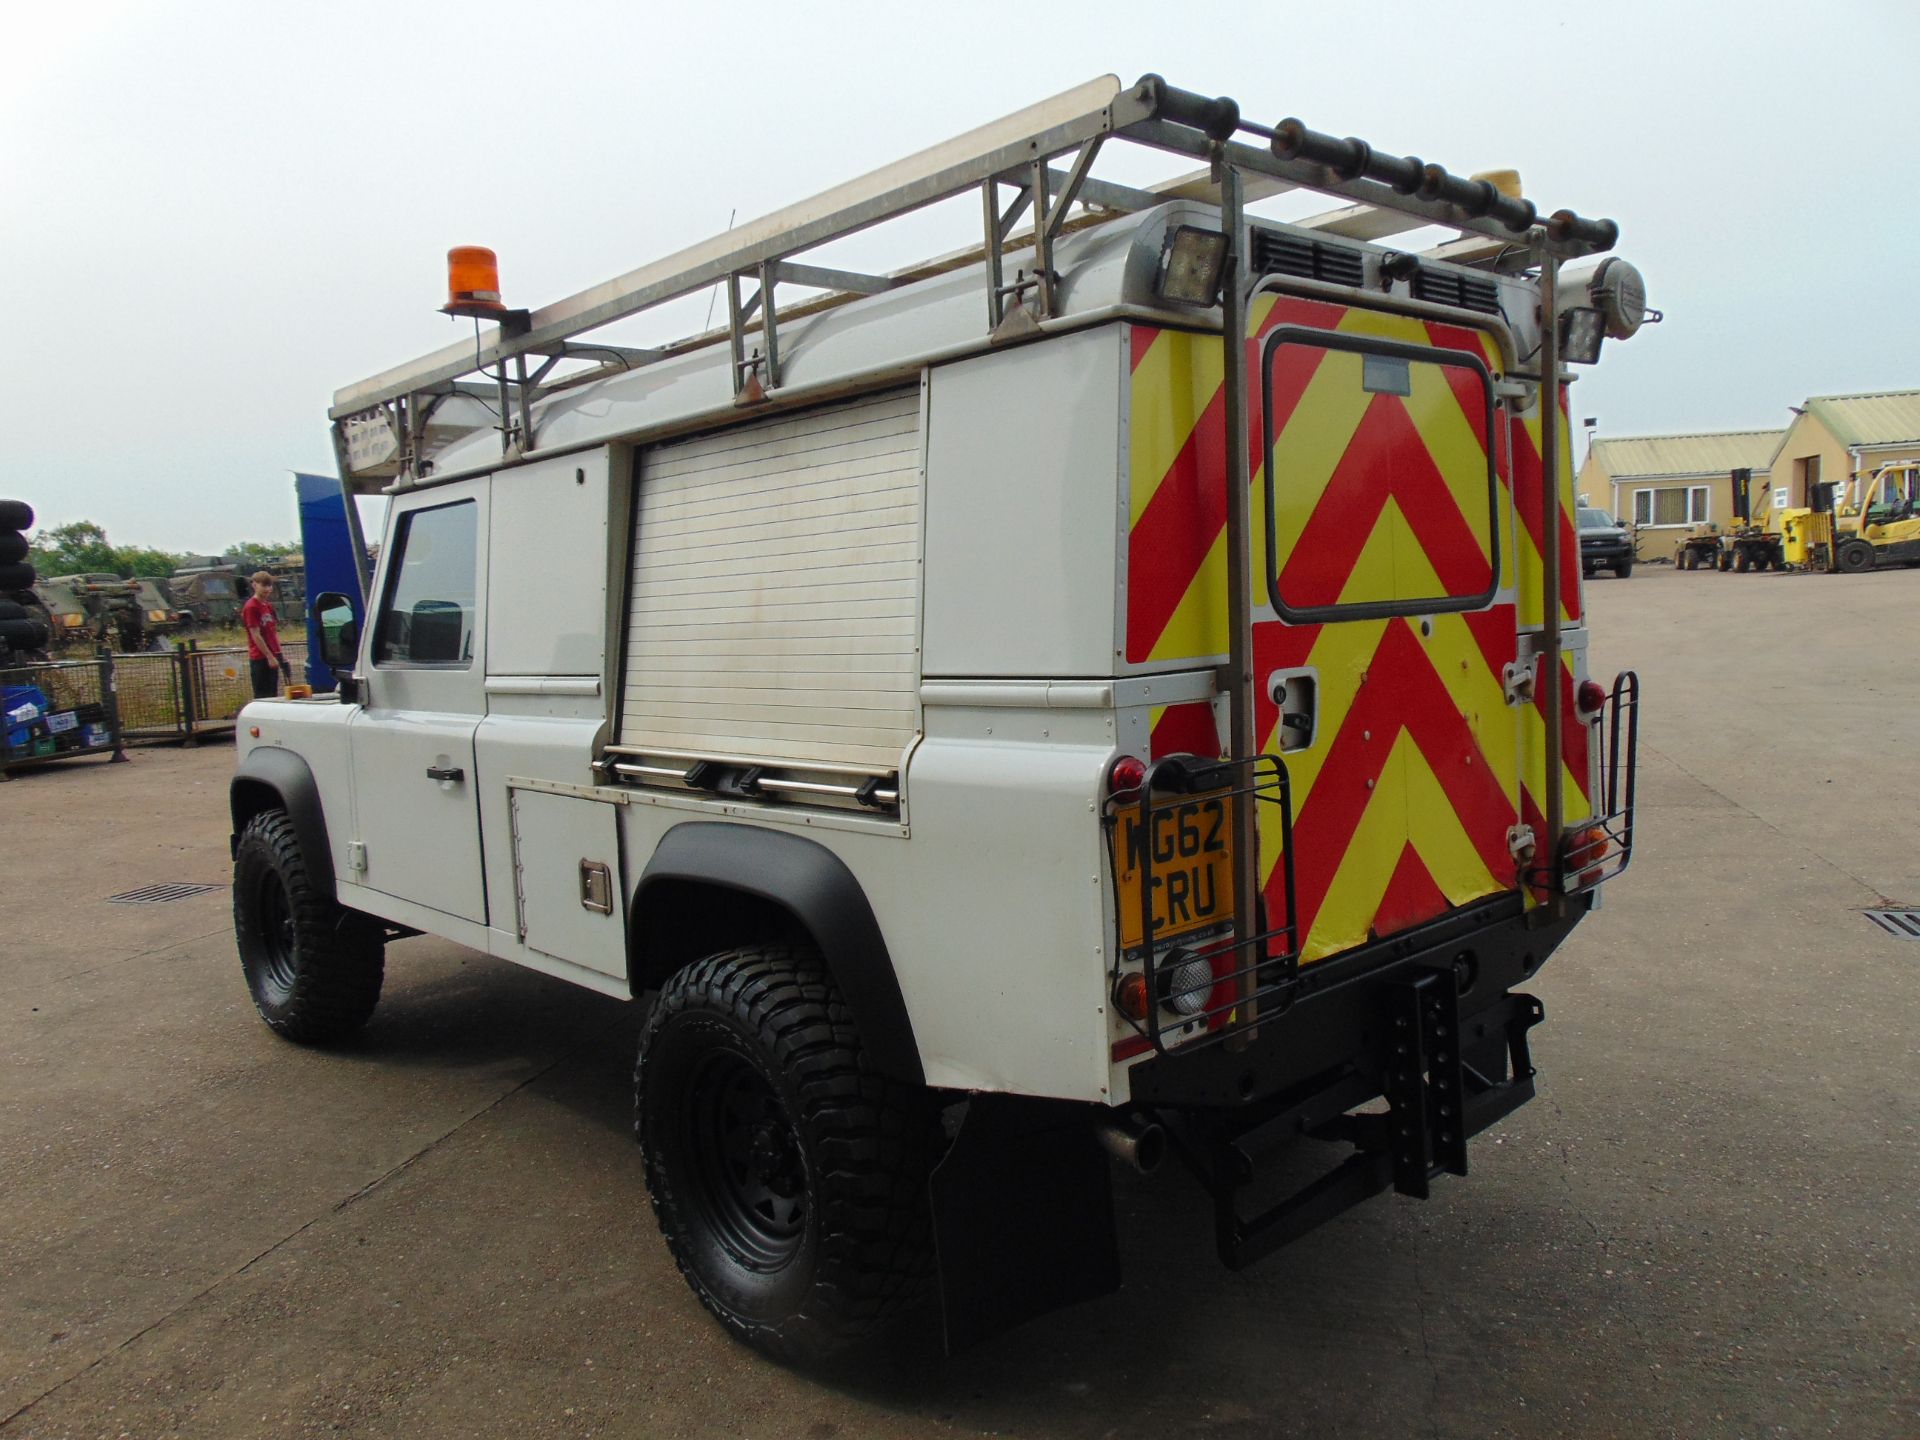 2013 Land Rover Defender 110 Puma hardtop 4x4 Utility vehicle (mobile workshop) with hydraulic winch - Image 10 of 44